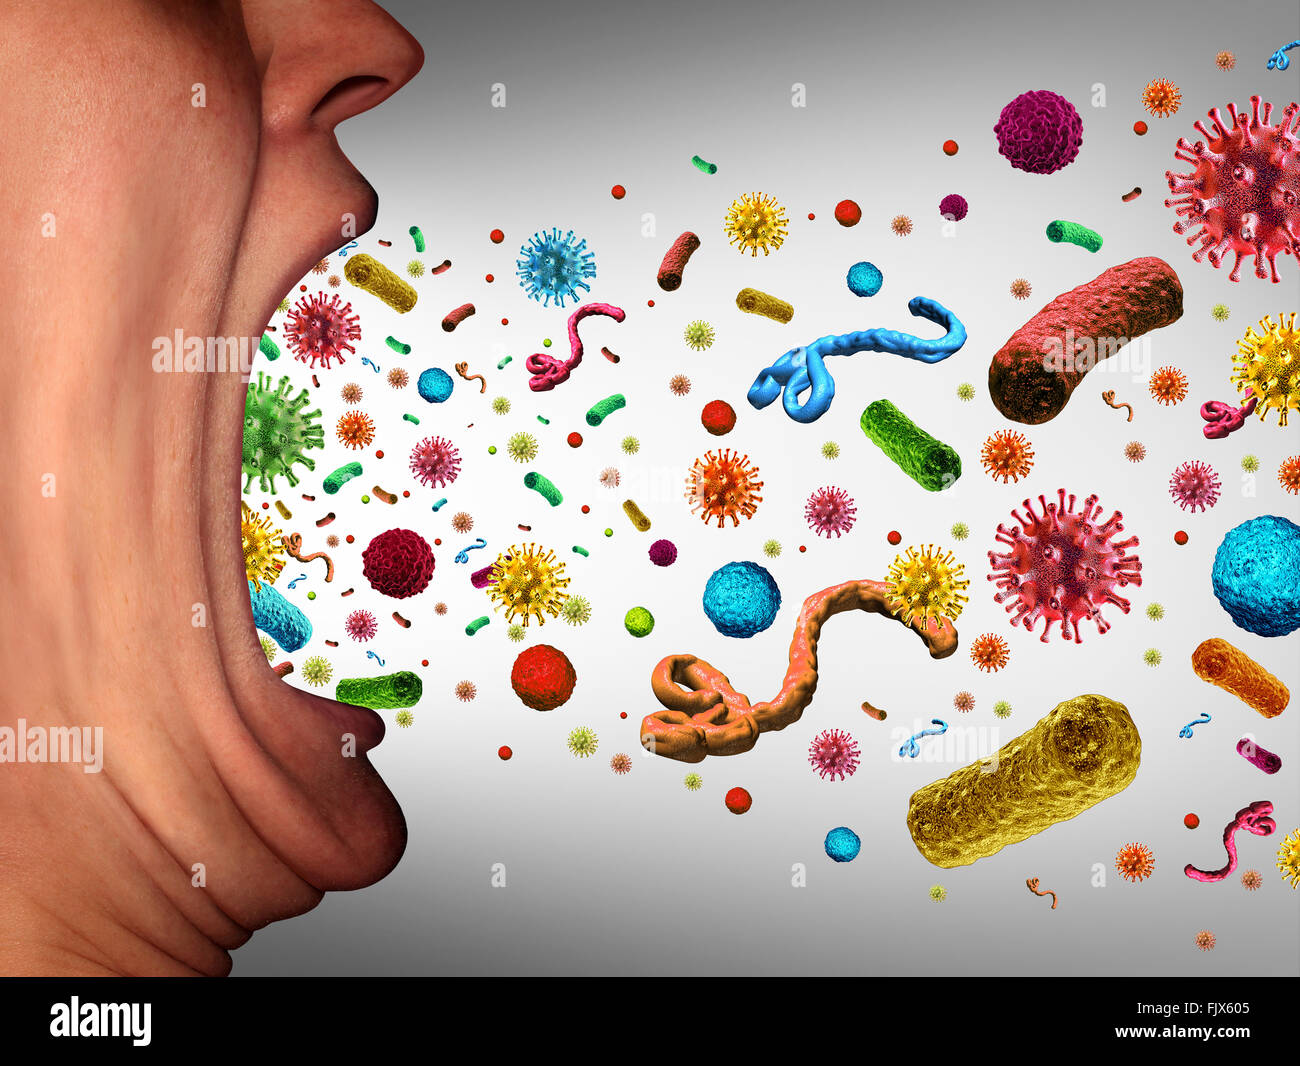 Human disease spreading as microscopic pathogens are being spread through an open mouth that is coughing or sneezing transmitting illness and contagious virus or bacteria as dangerous airborne germs. Stock Photo